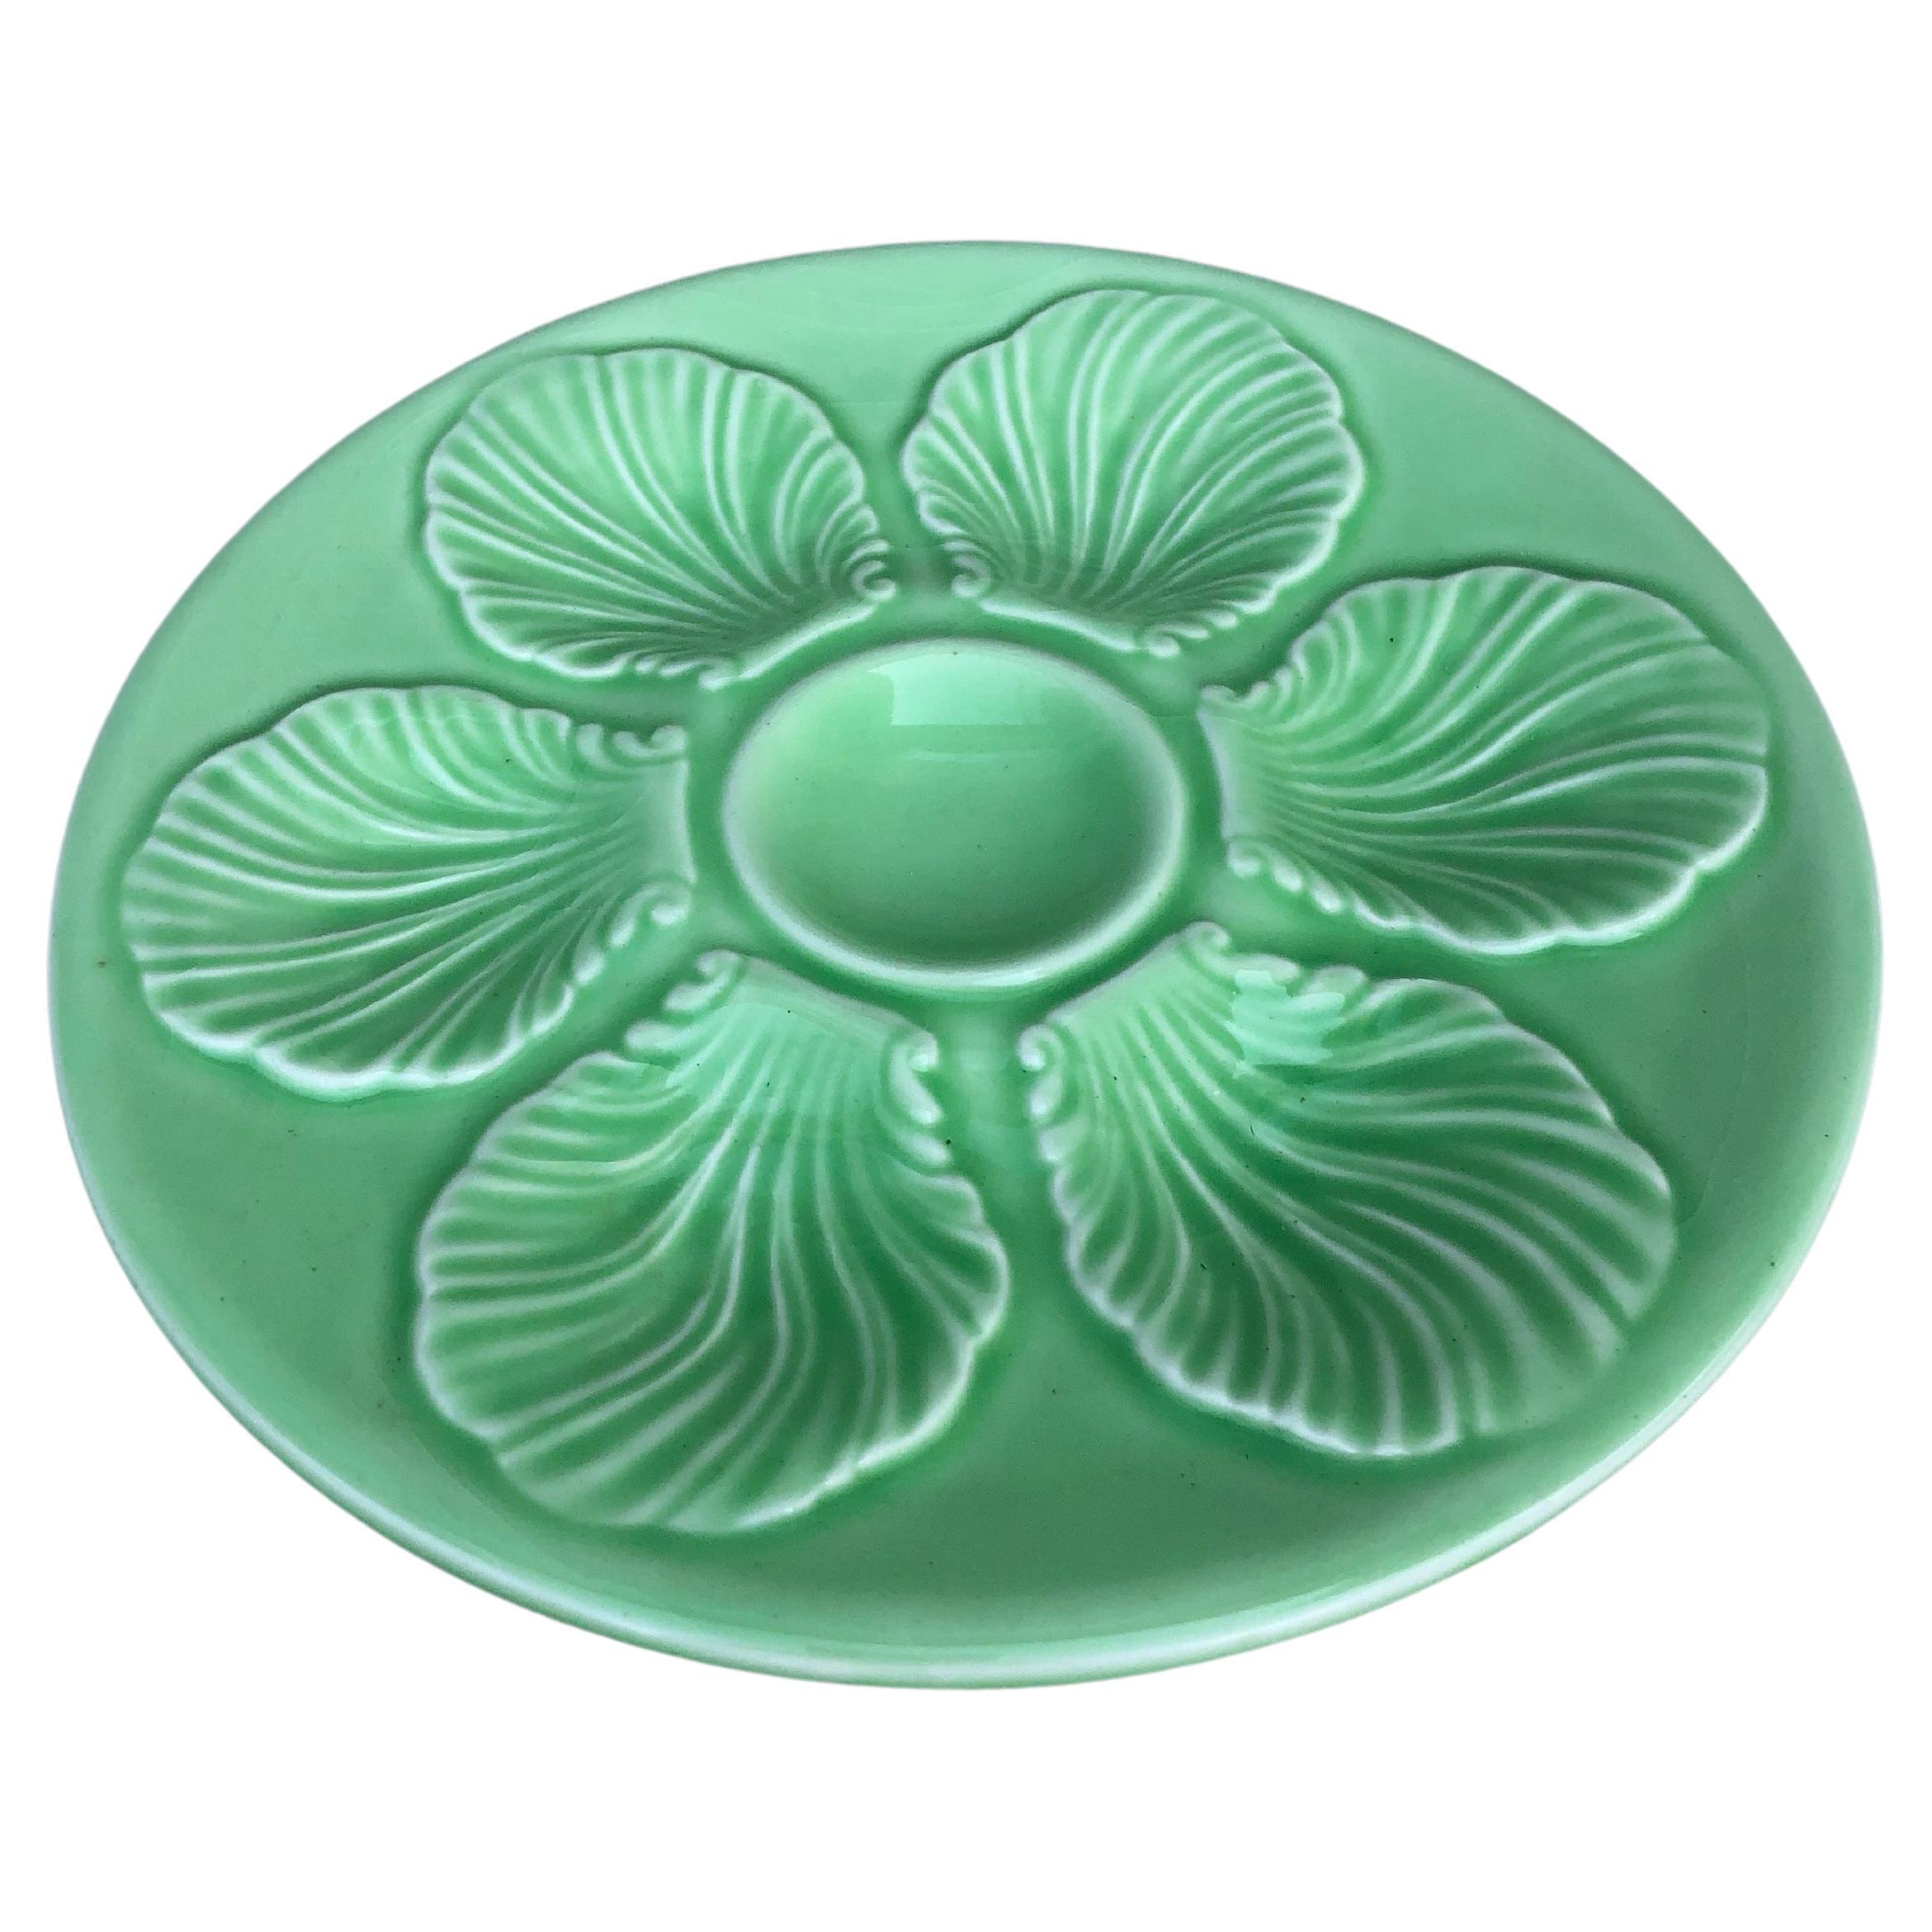 French green Majolica oyster plate signed Proceram, circa 1950.